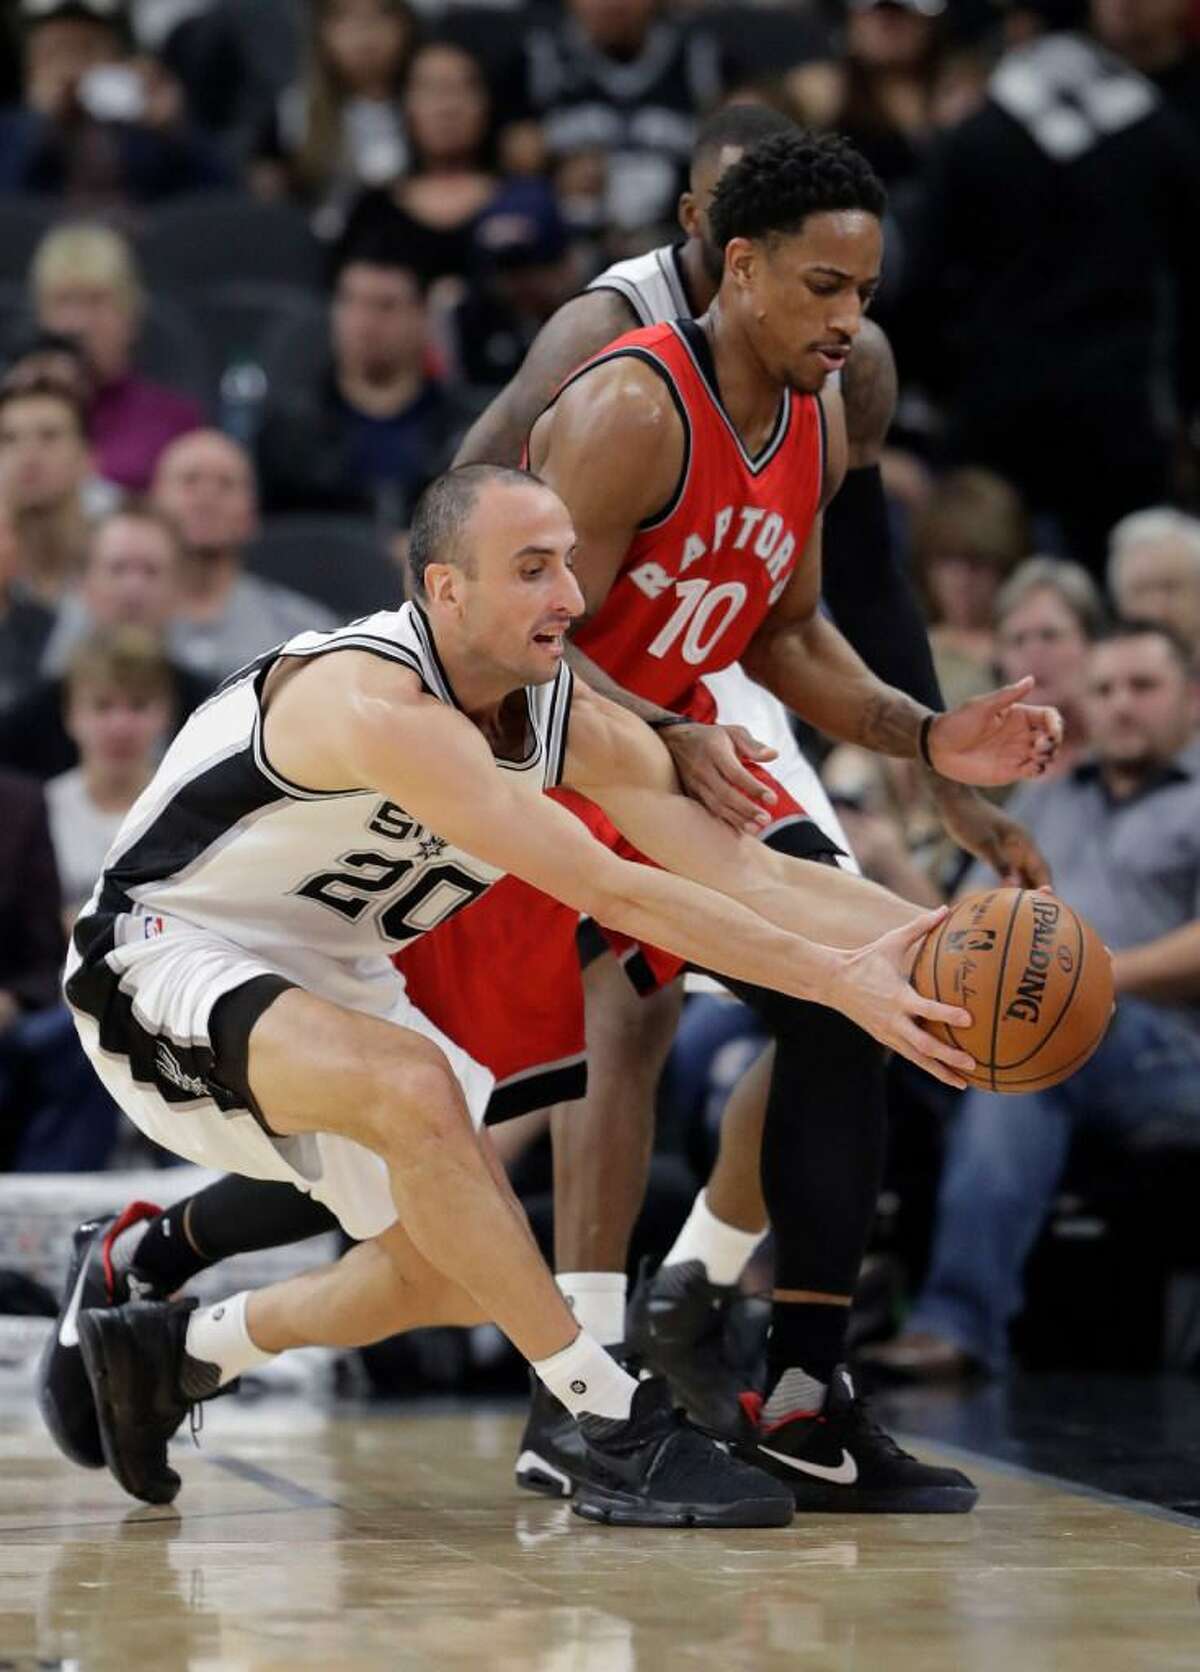 San Antonio Spurs guard Manu Ginobili (20) and Toronto Raptors guard DeMar DeRozan (10) chase a loose ball during the first half of the Spurs victory Tuesday at the AT&T Center.